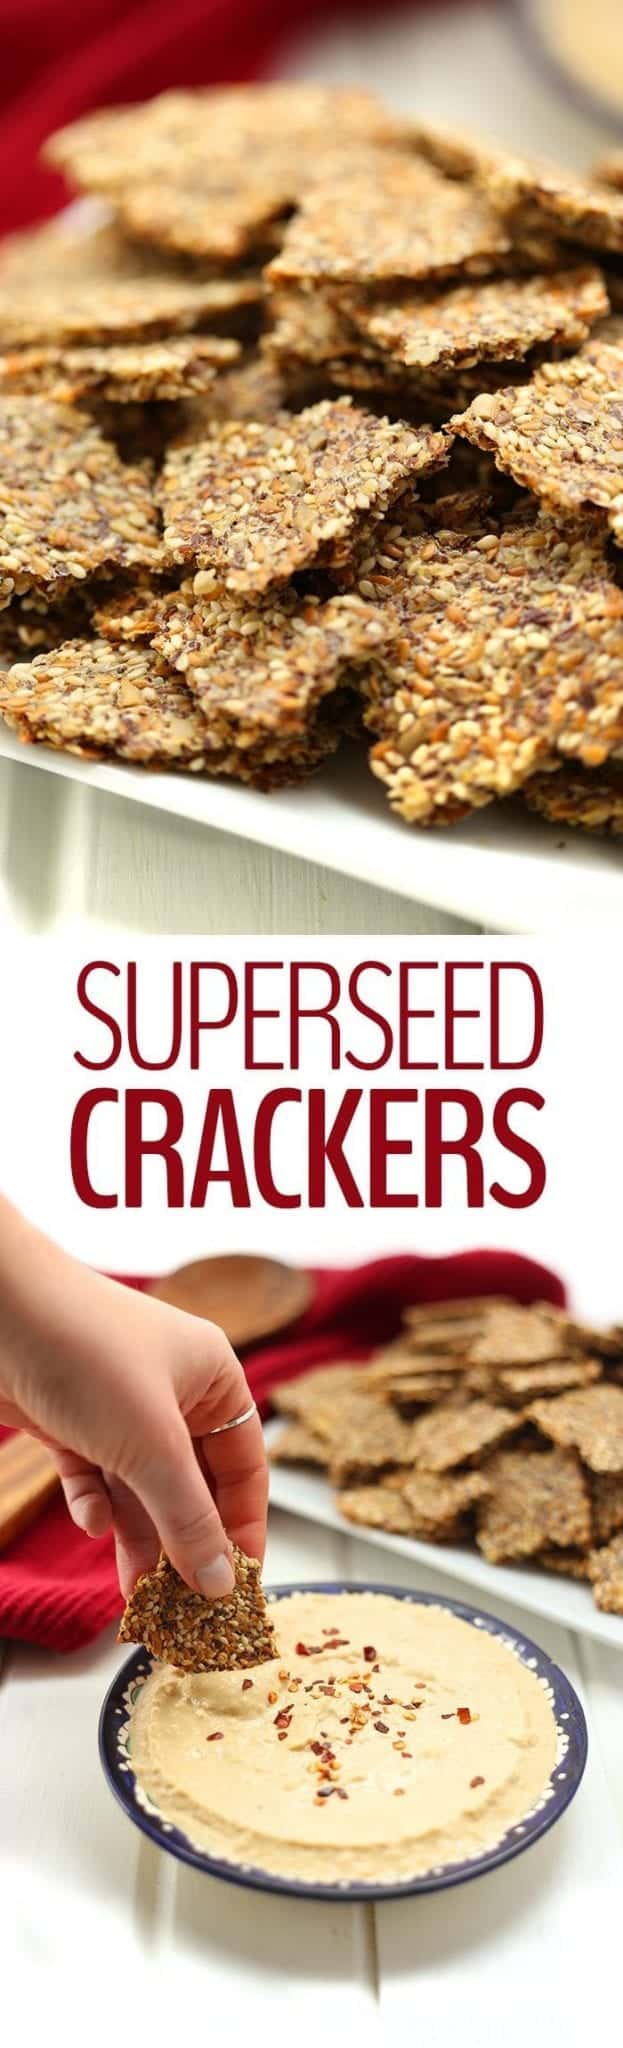 Crackers just got a healthy makeover with these SuperSeed Crackers made entirely from fiber-rich and omega-filled super seeds! Grab your seeds, mix with water and spices and bake! That's all you need for this healthy snack recipe perfect for dipping.